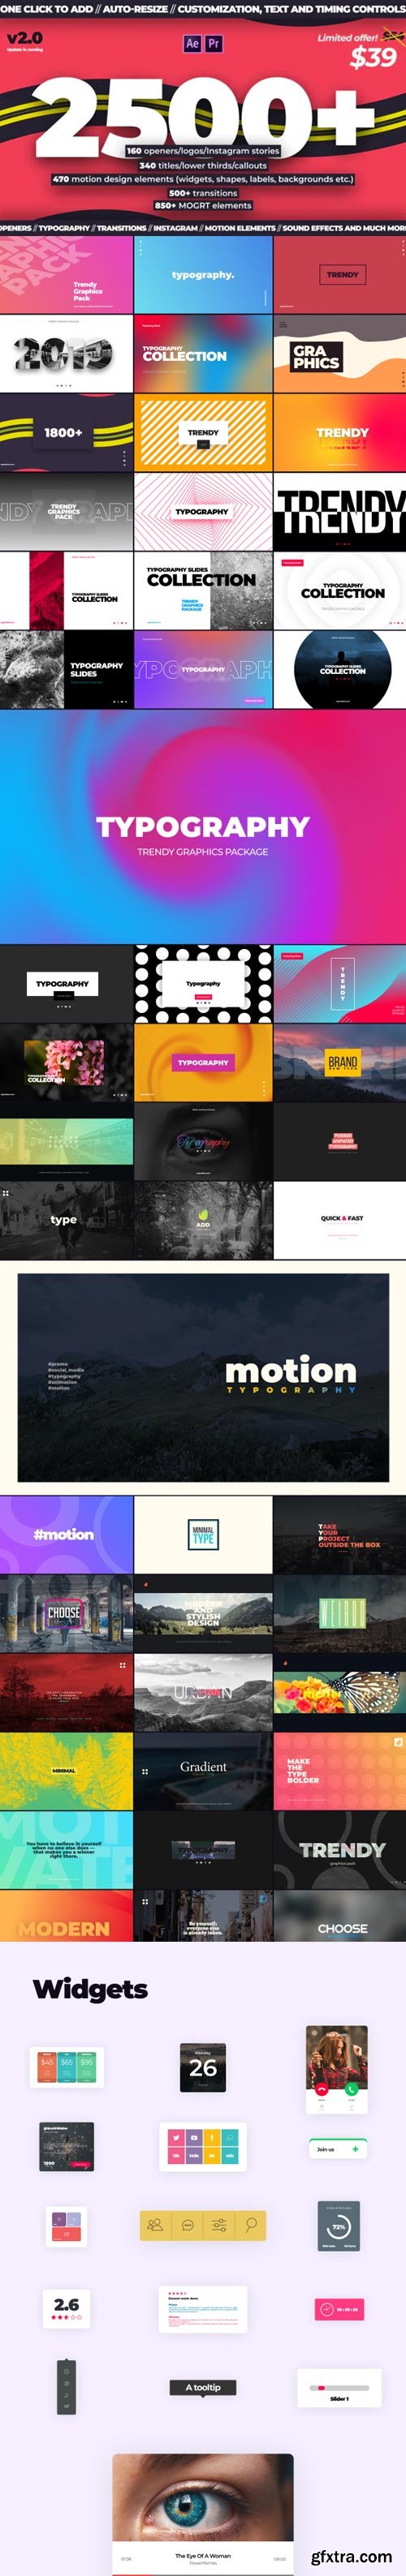 Videohive - Trendy Motion Graphics Package V.2 - 24321544